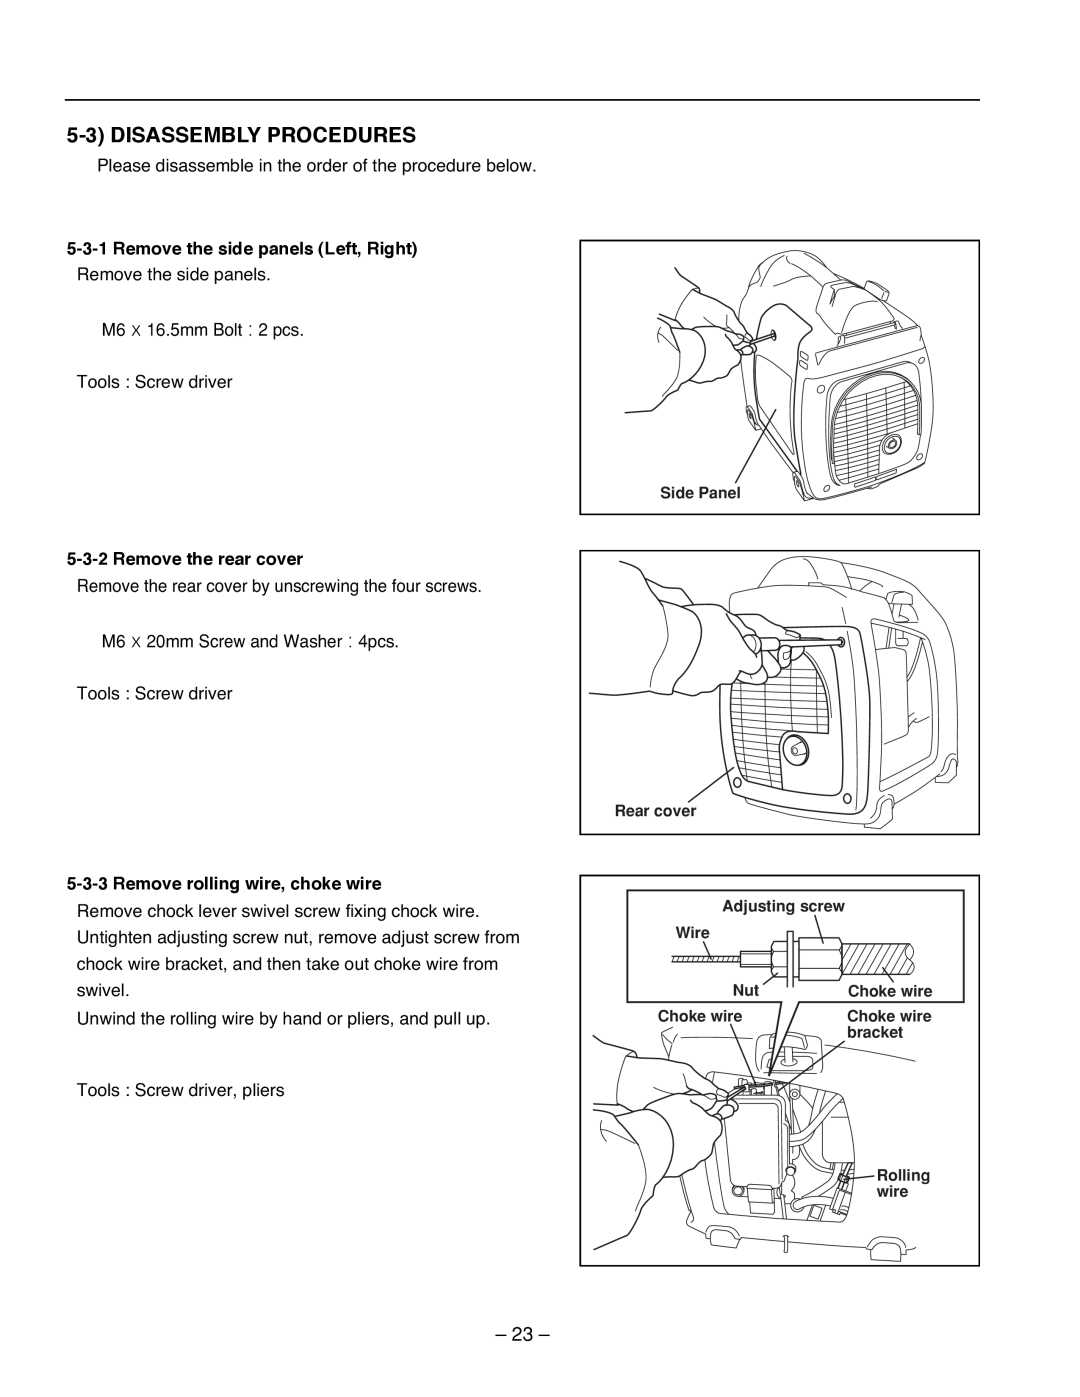 Subaru R1100 service manual Disassembly Procedures, Remove the side panels Left, Right, Remove the rear cover 